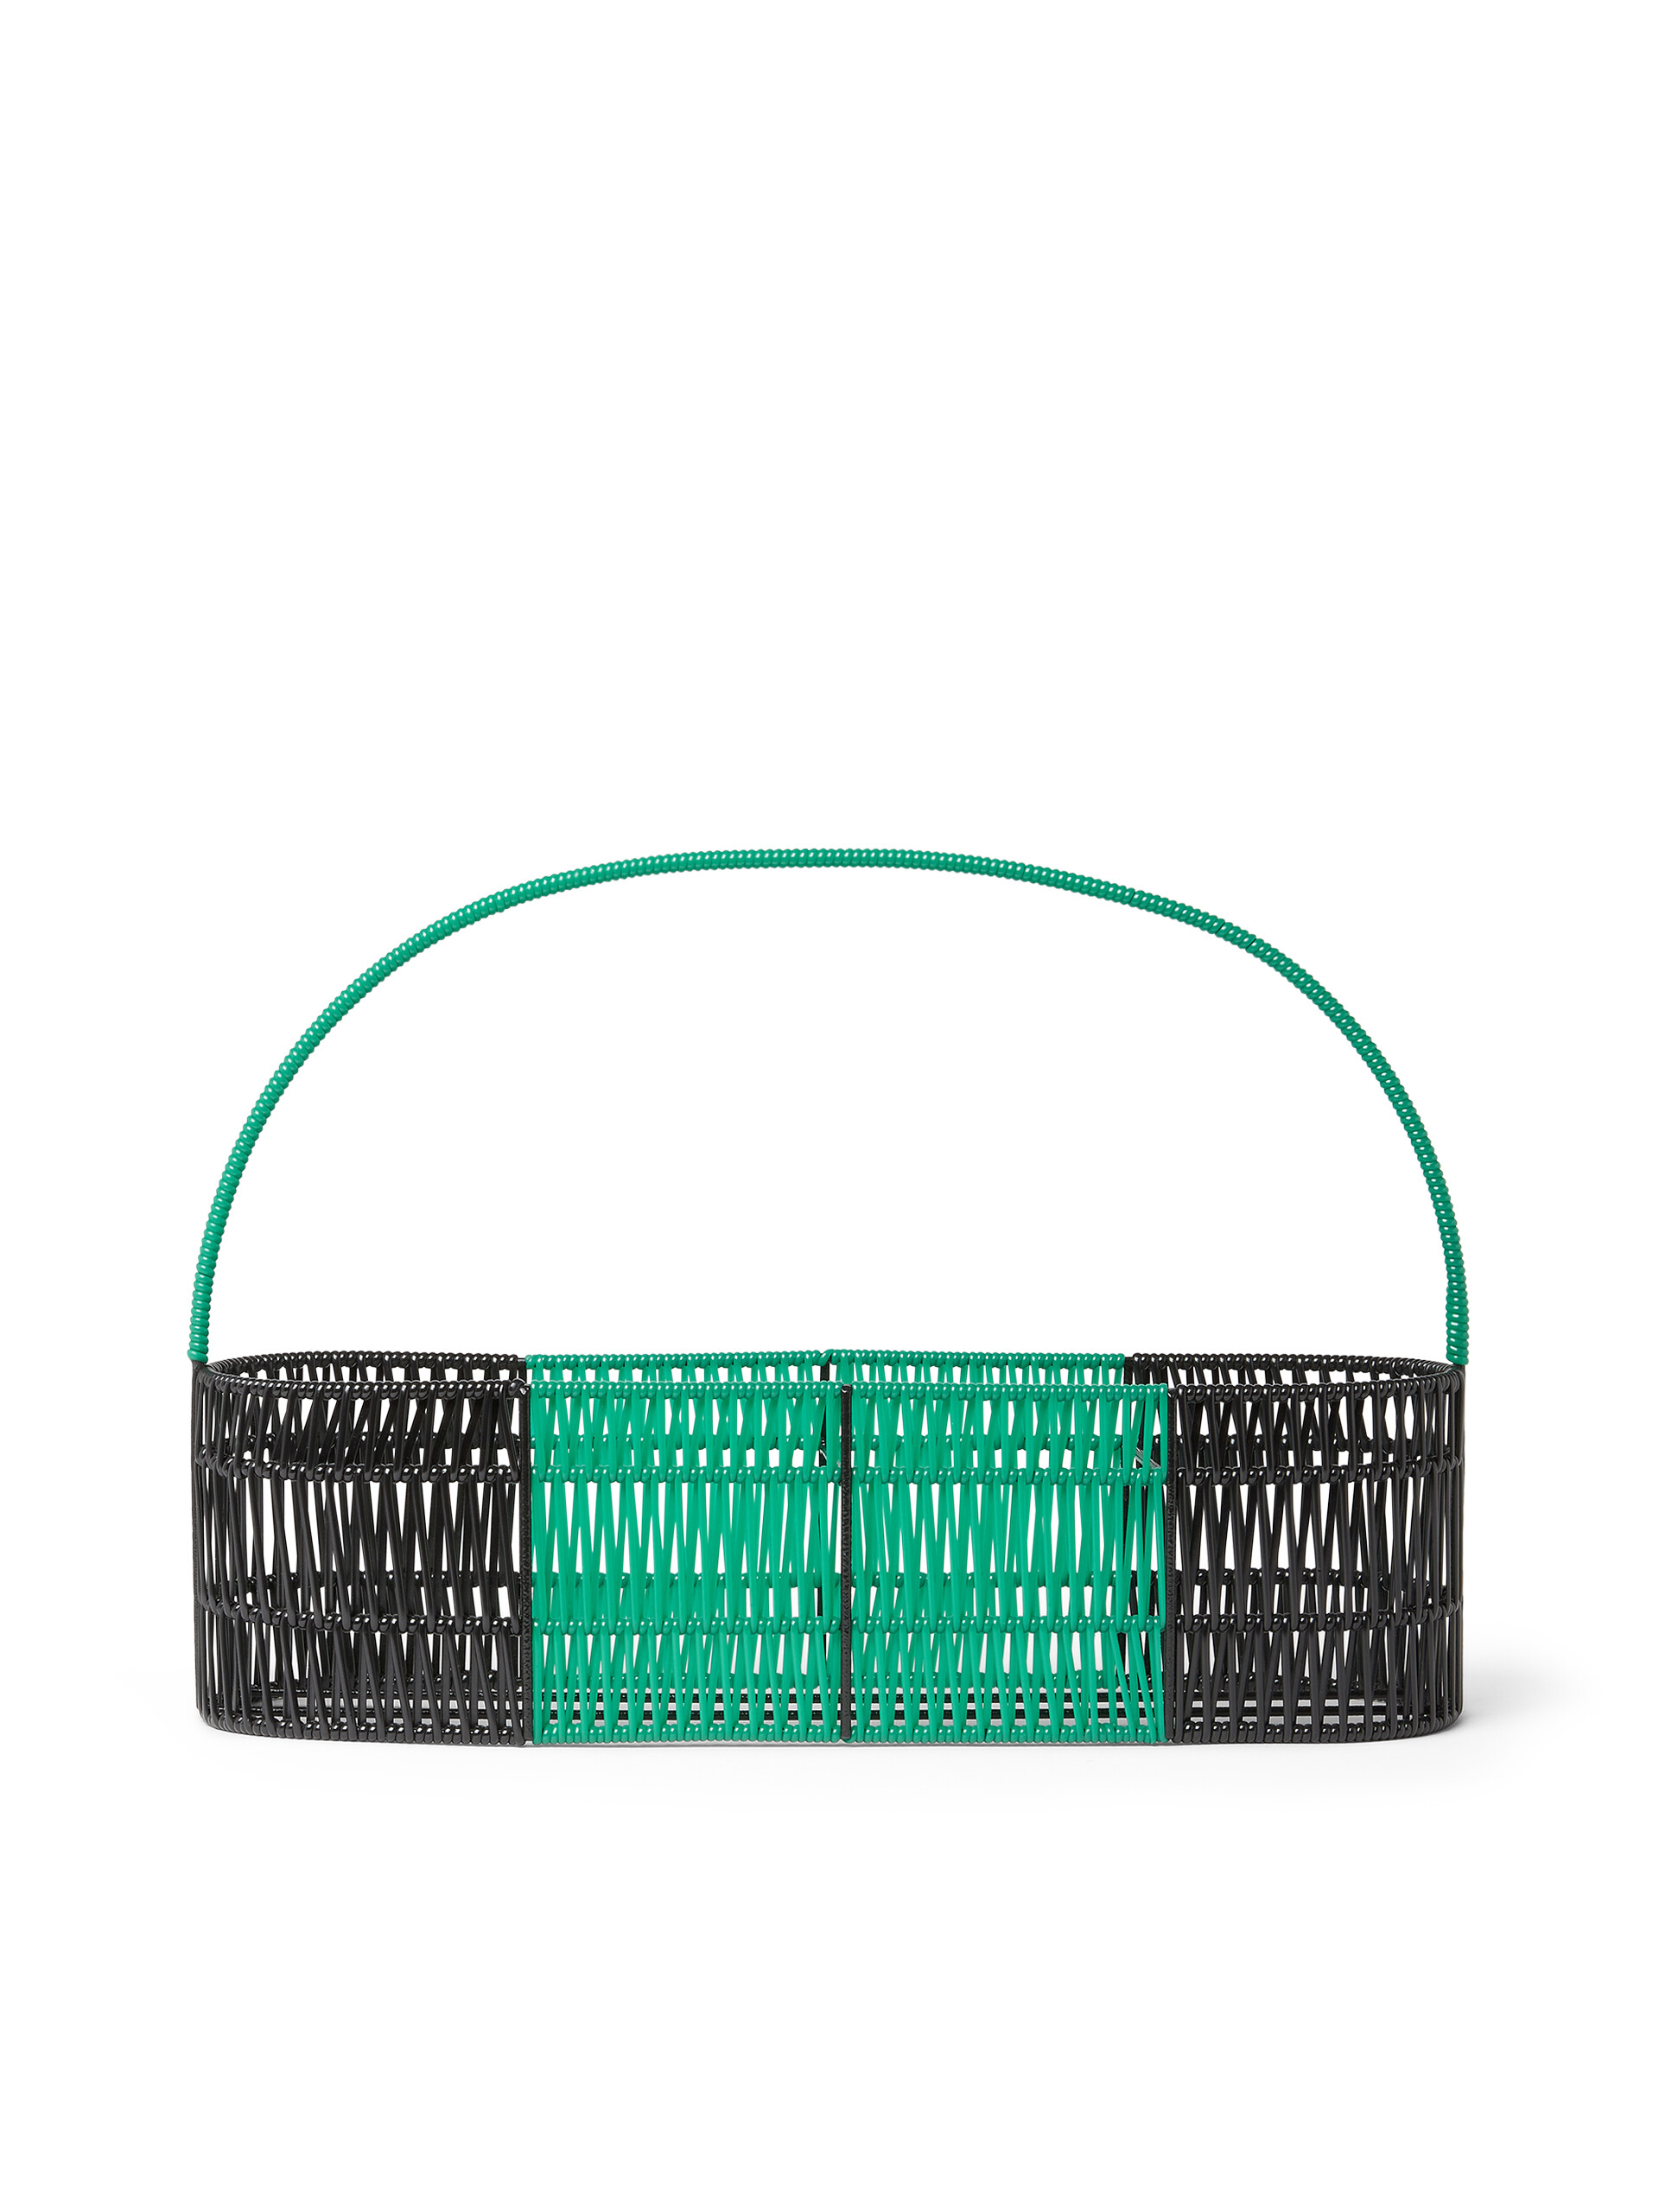 MARNI MARKET oval basket in metal and bi-coloured PVC with long handle - Furniture - Image 3